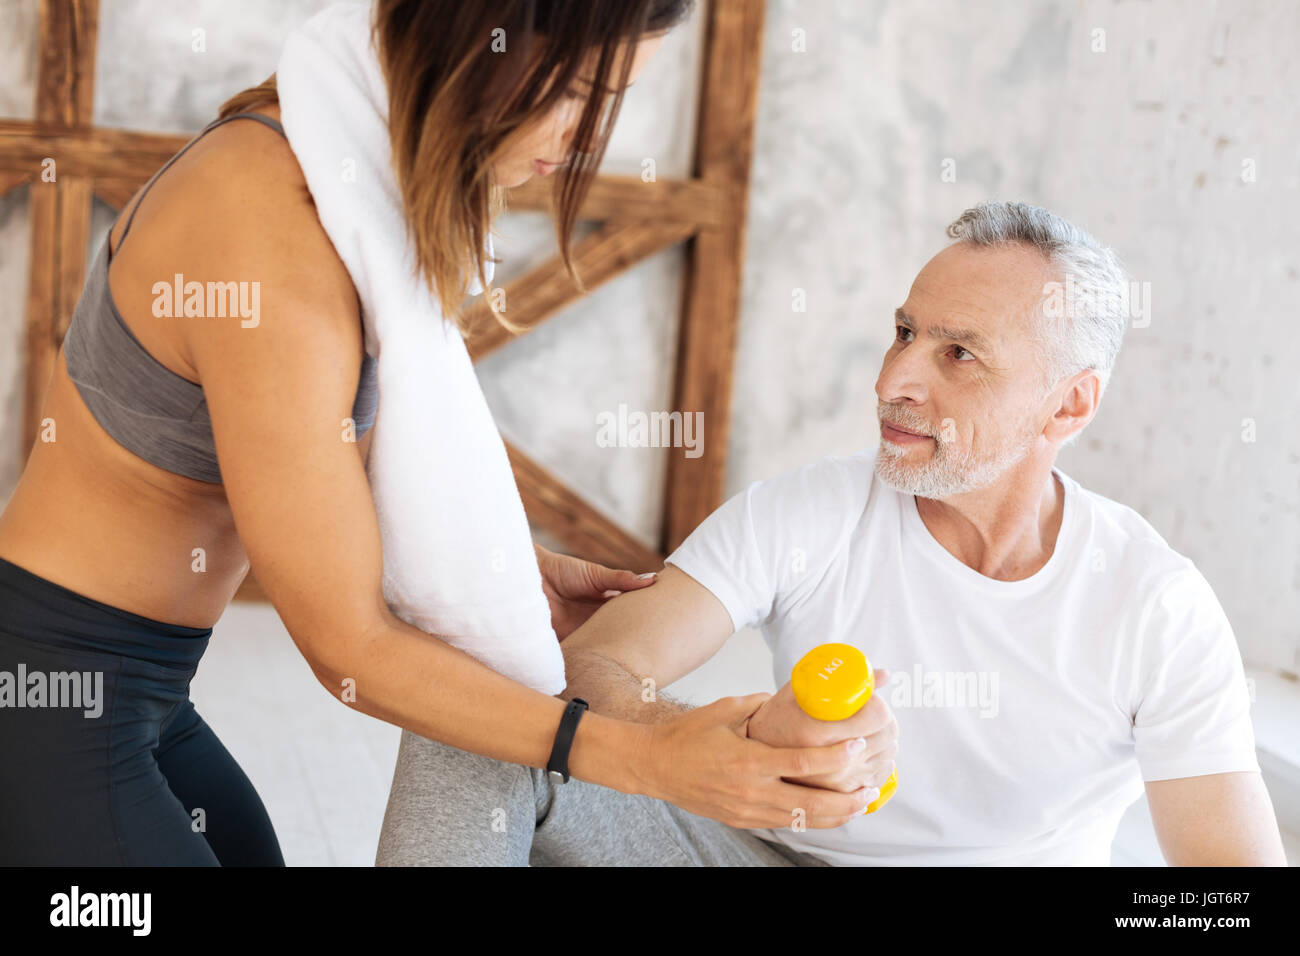 Attentive brunette helping to raise arm correctly Stock Photo